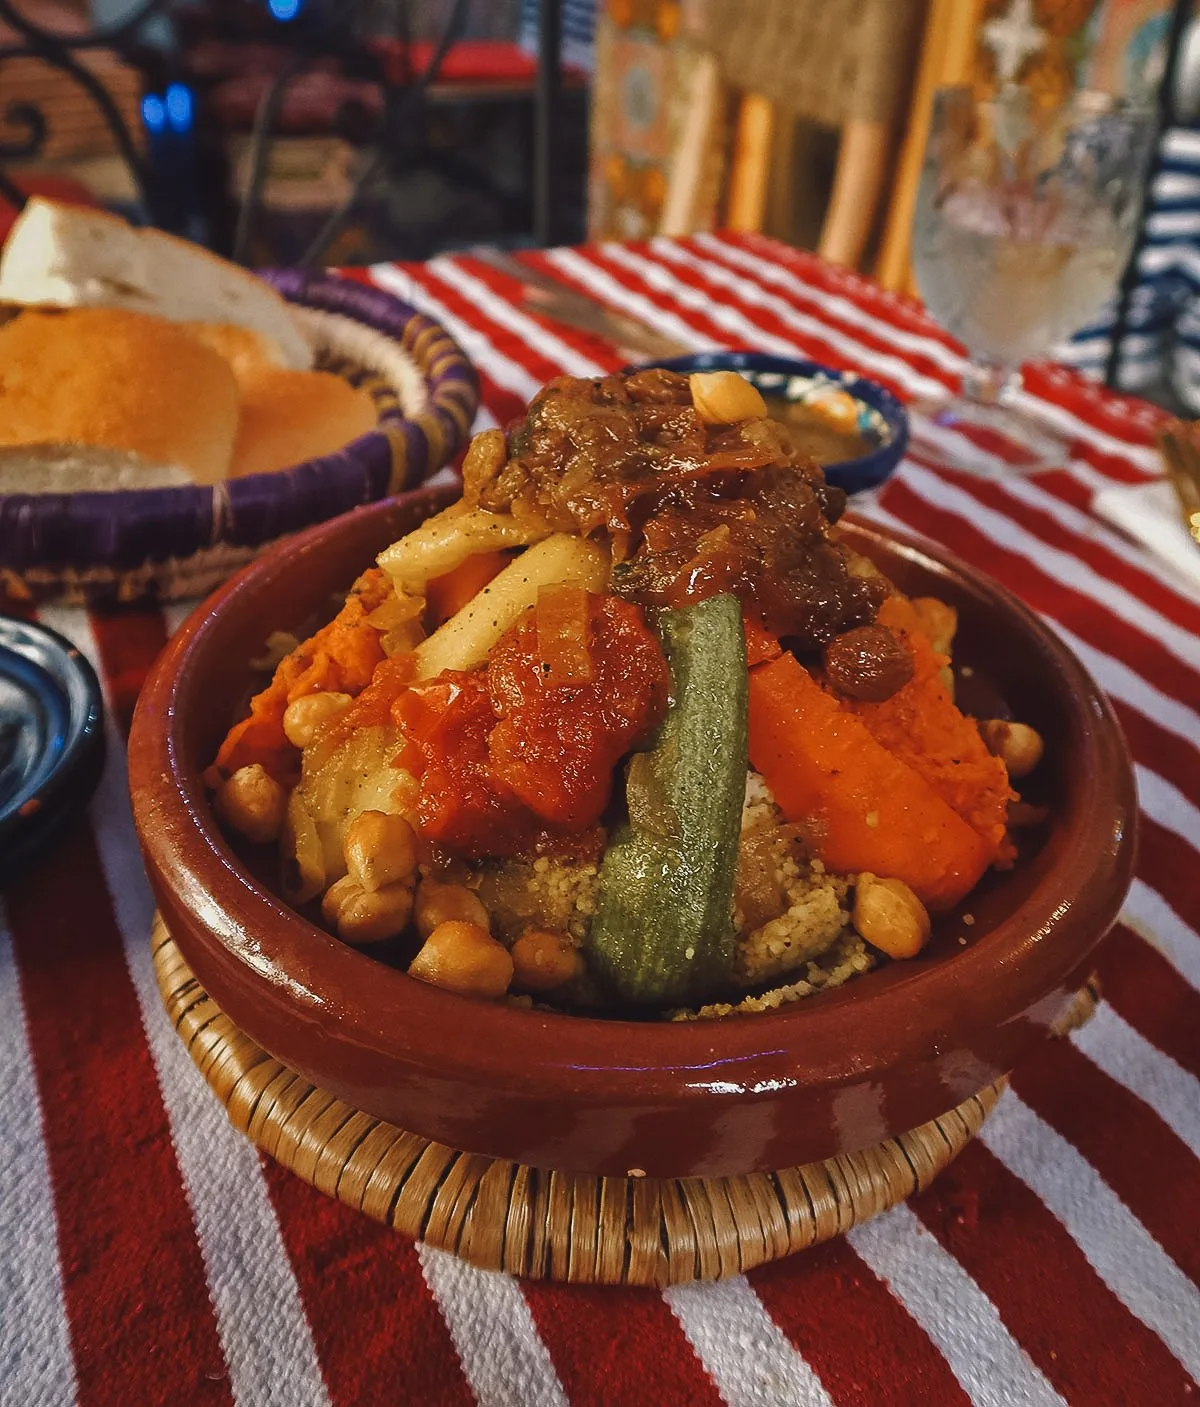 Couscous at a restaurant in Tangier